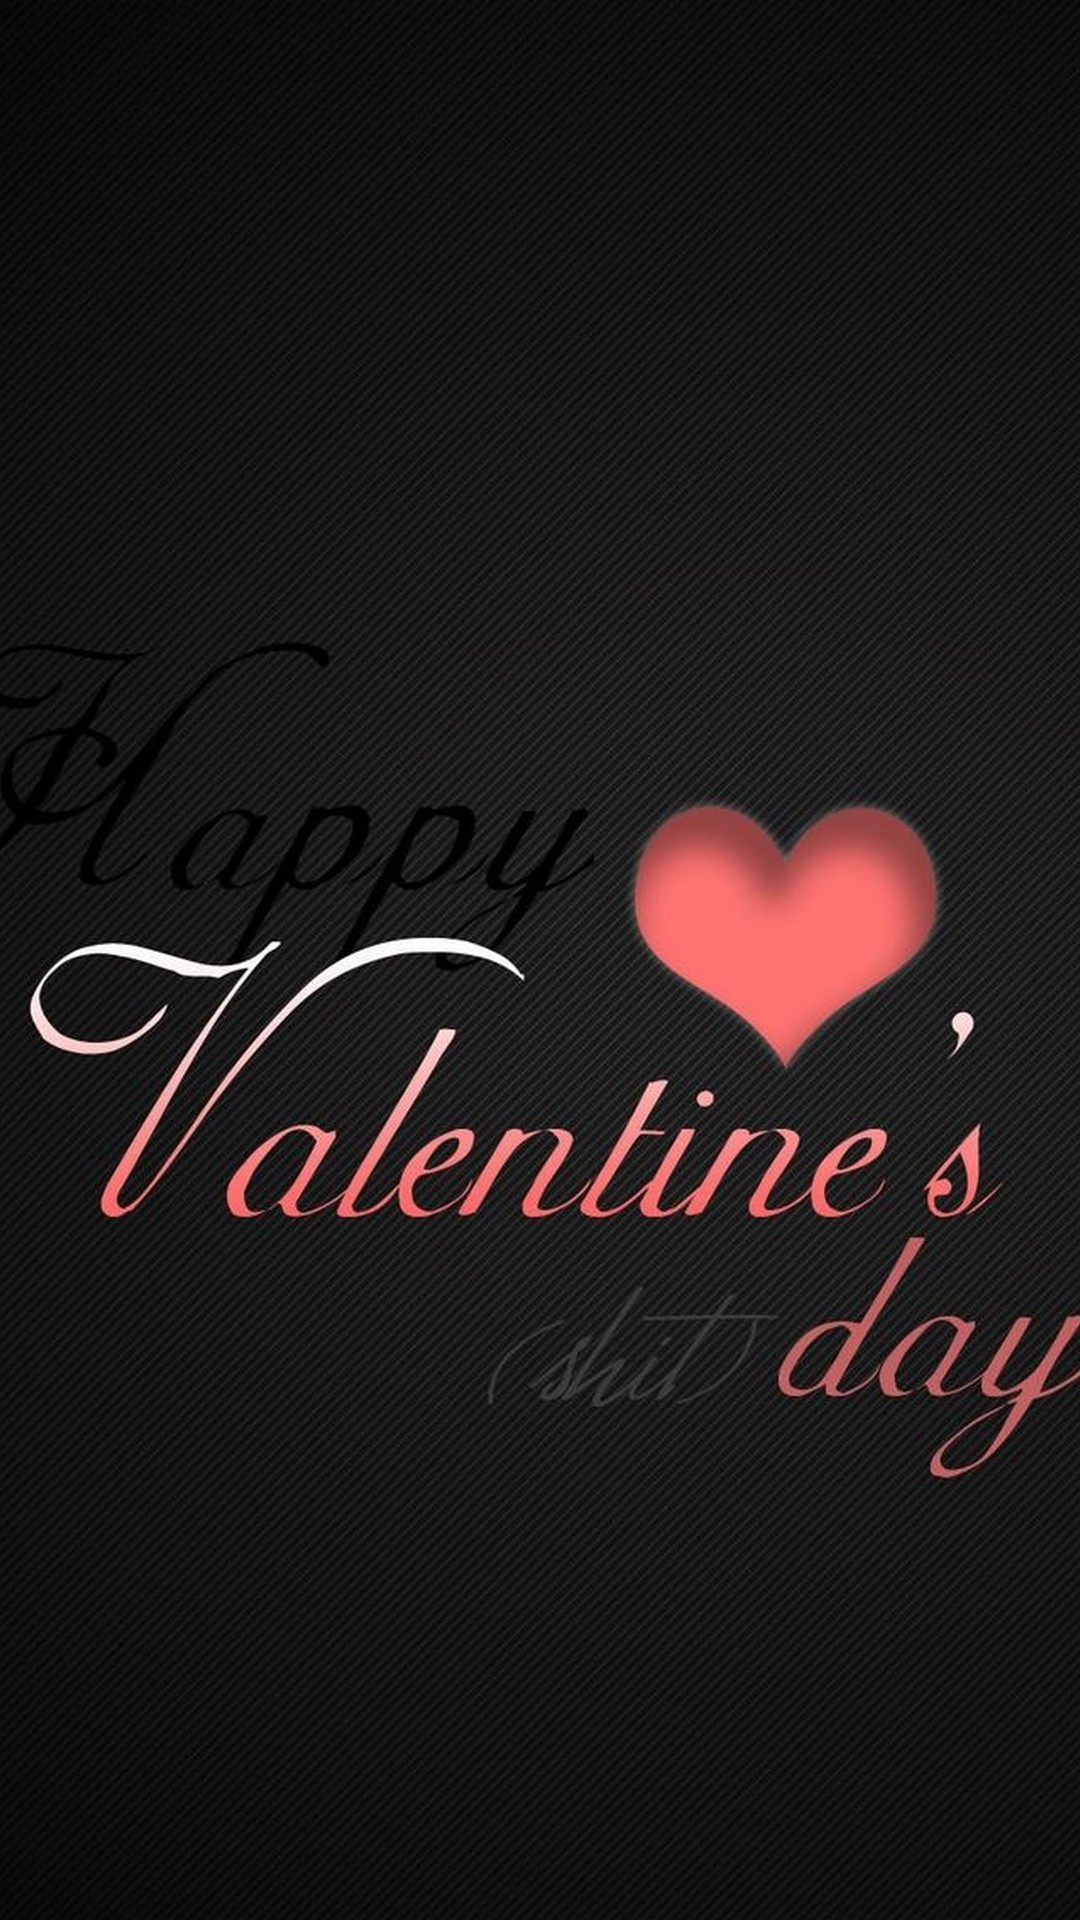 Happy Valentines Day Images Wallpaper Android with HD resolution 1080x1920